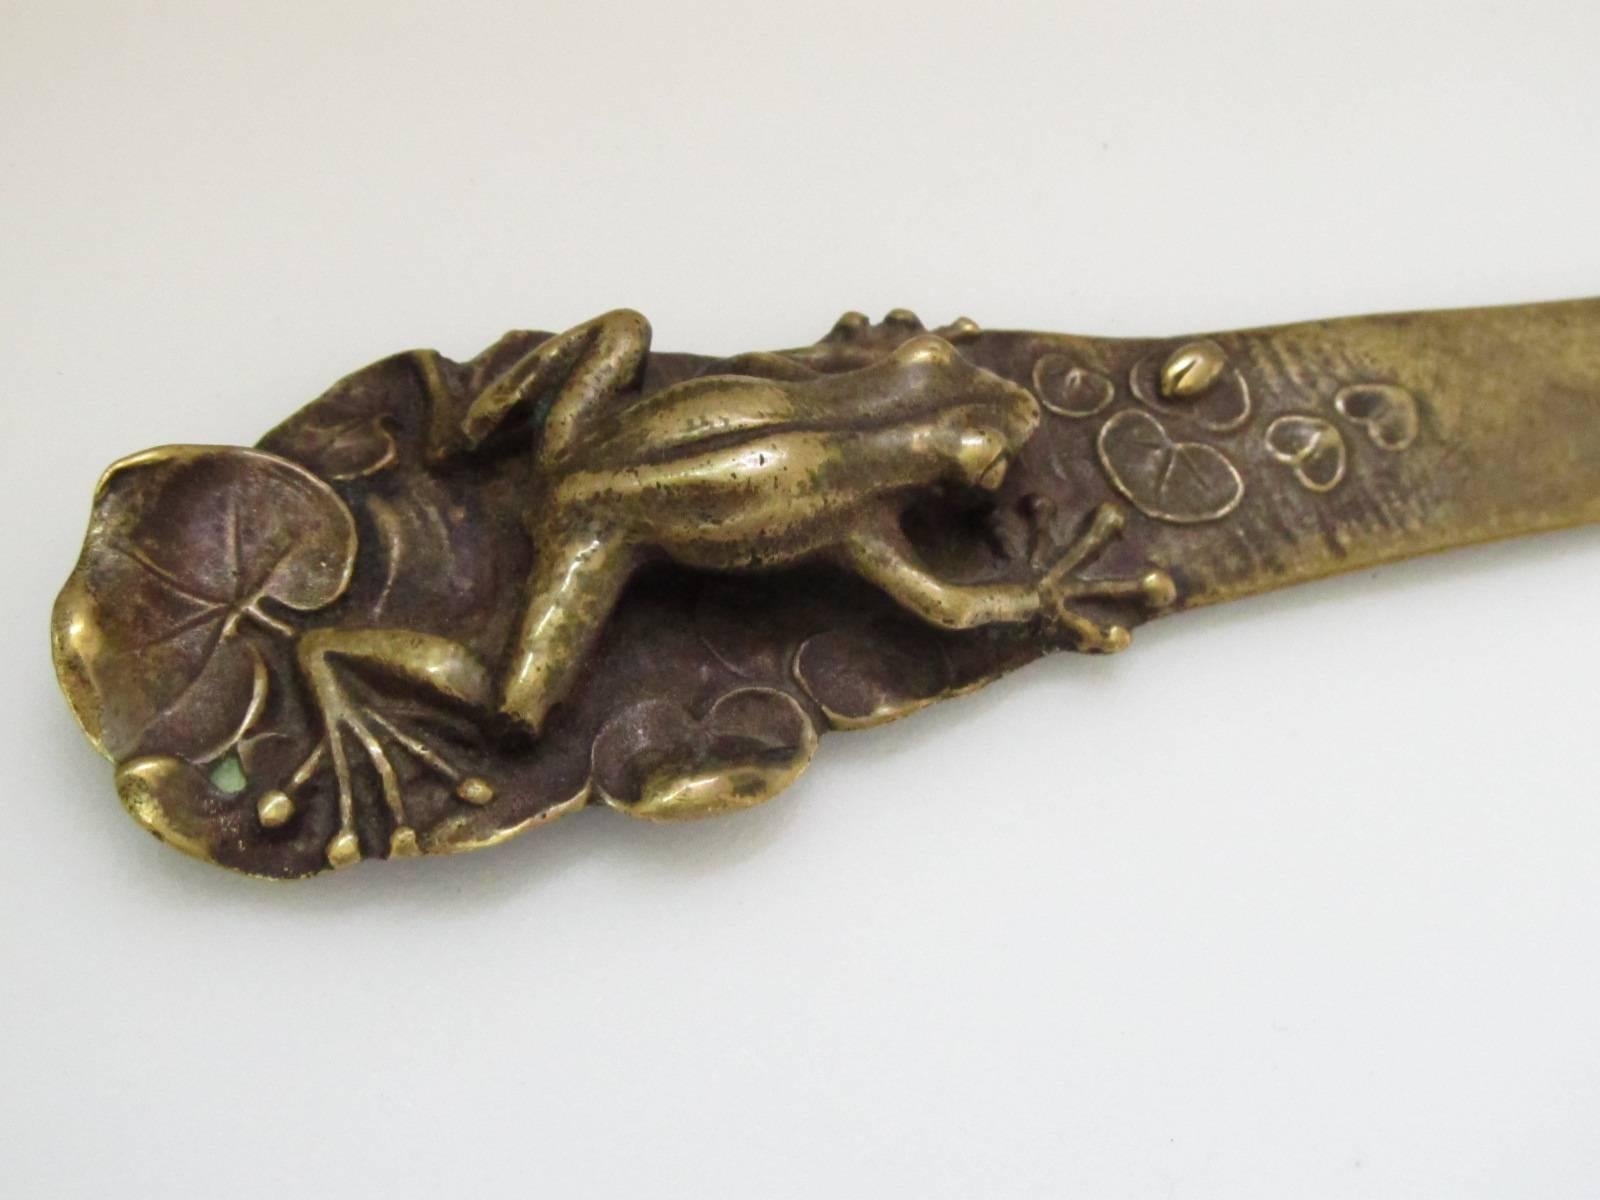 This charming letter opener has a 3 dimensional figural frog stalking an insect sitting on a lily pad. The moment of anticipation, frozen in time. It's a beautiful representation of Japanese art at the turn of the 20th century. A natural and organic